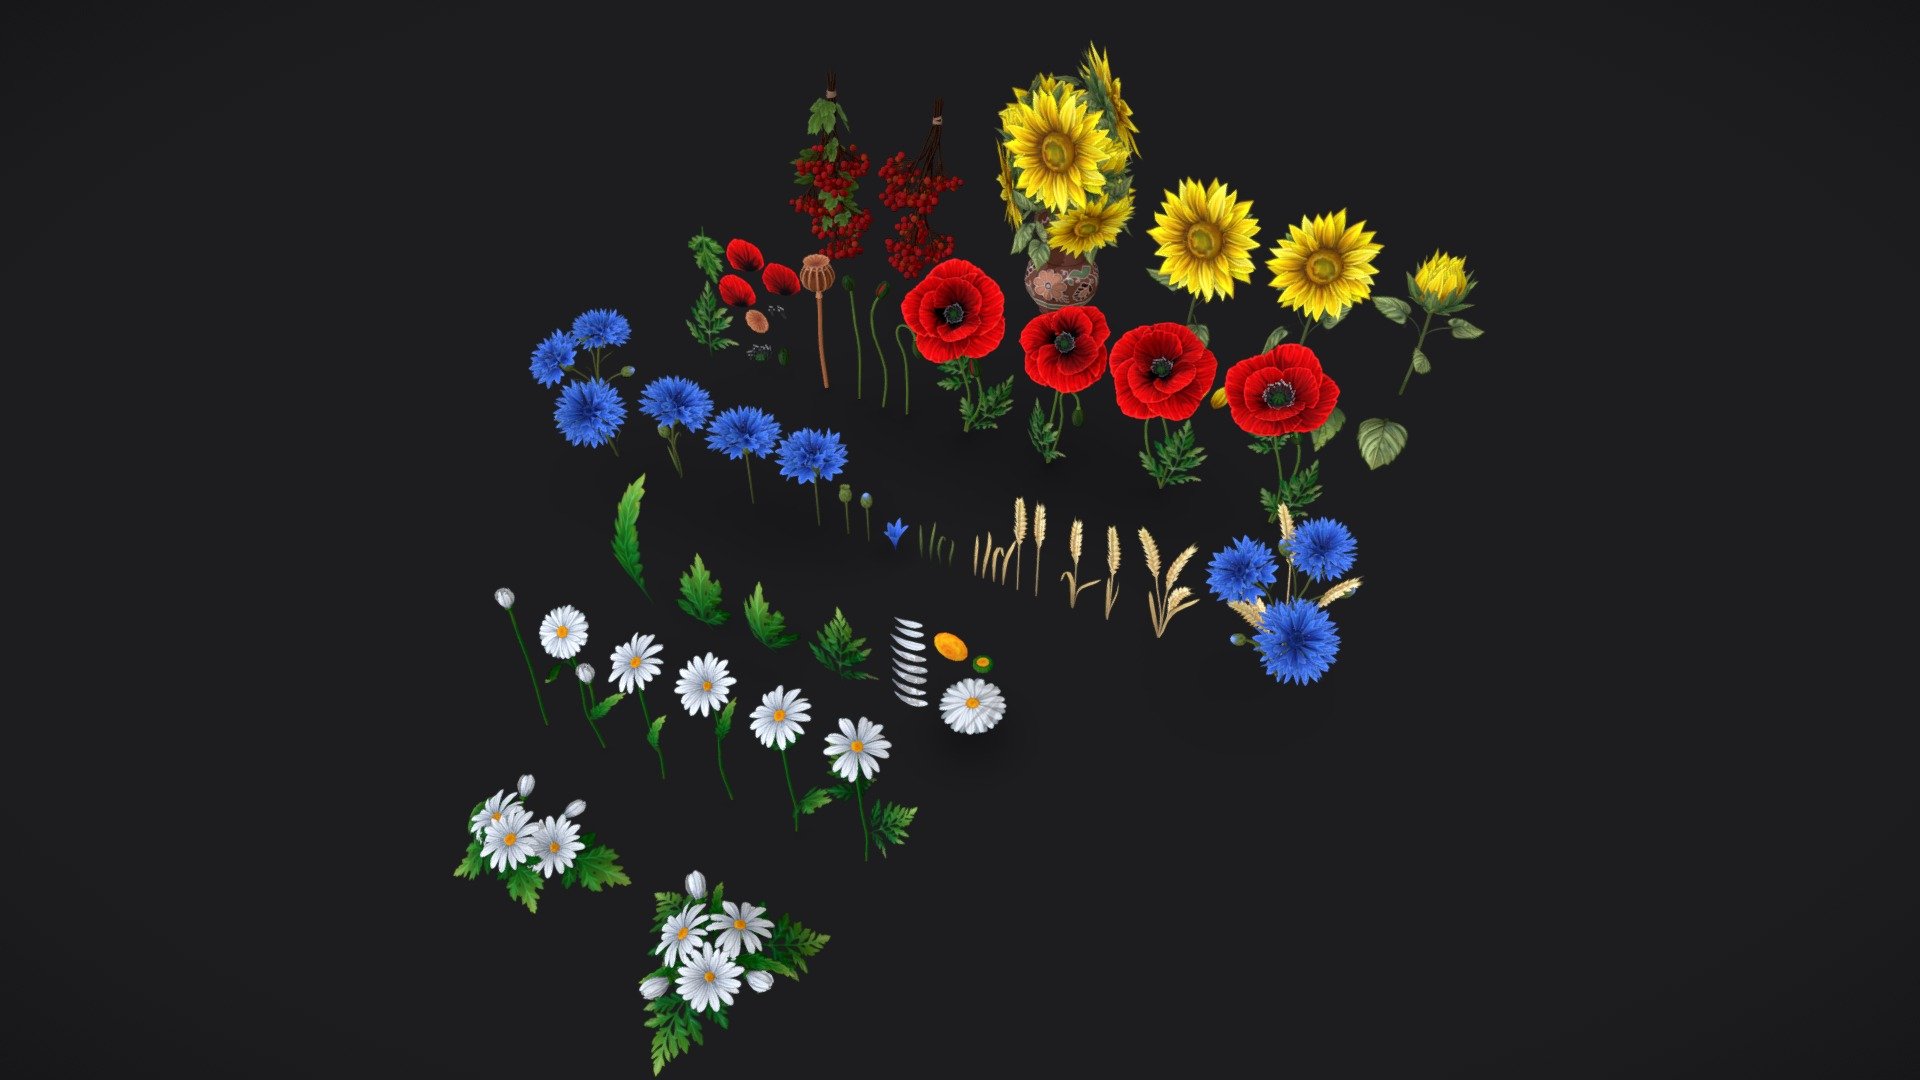 The pack of wild flowers handpainted models. 
These are common field flowers of Ukraine.  

The archive contains the following files:




.MA file (original MAYA file, version 2023) with all meshes

FBX and OBJ files with all meshes

separate FBX and OBJ files for each flower set (5 pcs)

.tga textures for BaseColor and Opacity

Geometry:




Guelder Rose
10 200 polygons

Texture: 
2k texture for berries
1k texture for leaves 




Sunflower Pot
204 polygons

Texture: 2k texture




Sunflower
9 300 polygons

Texture: 1k, 2k, 4k options 




Cornflower and Wheat
10 600 polygons

Texture: 1k, 2k, 4k options 




Poppies
4580 polygons

Texture: 1k, 2k, 4k options 




Daisies
3700 polygons

Texture: 1k, 2k, 4k options 

Each model also can be viewed or bought separately.
If you have any additional questions or any problems related to the model, kindly contact me: katy.b2802@gmail.com - Pack Stylized handpainted wild flowers - Buy Royalty Free 3D model by Enkarra 3d model